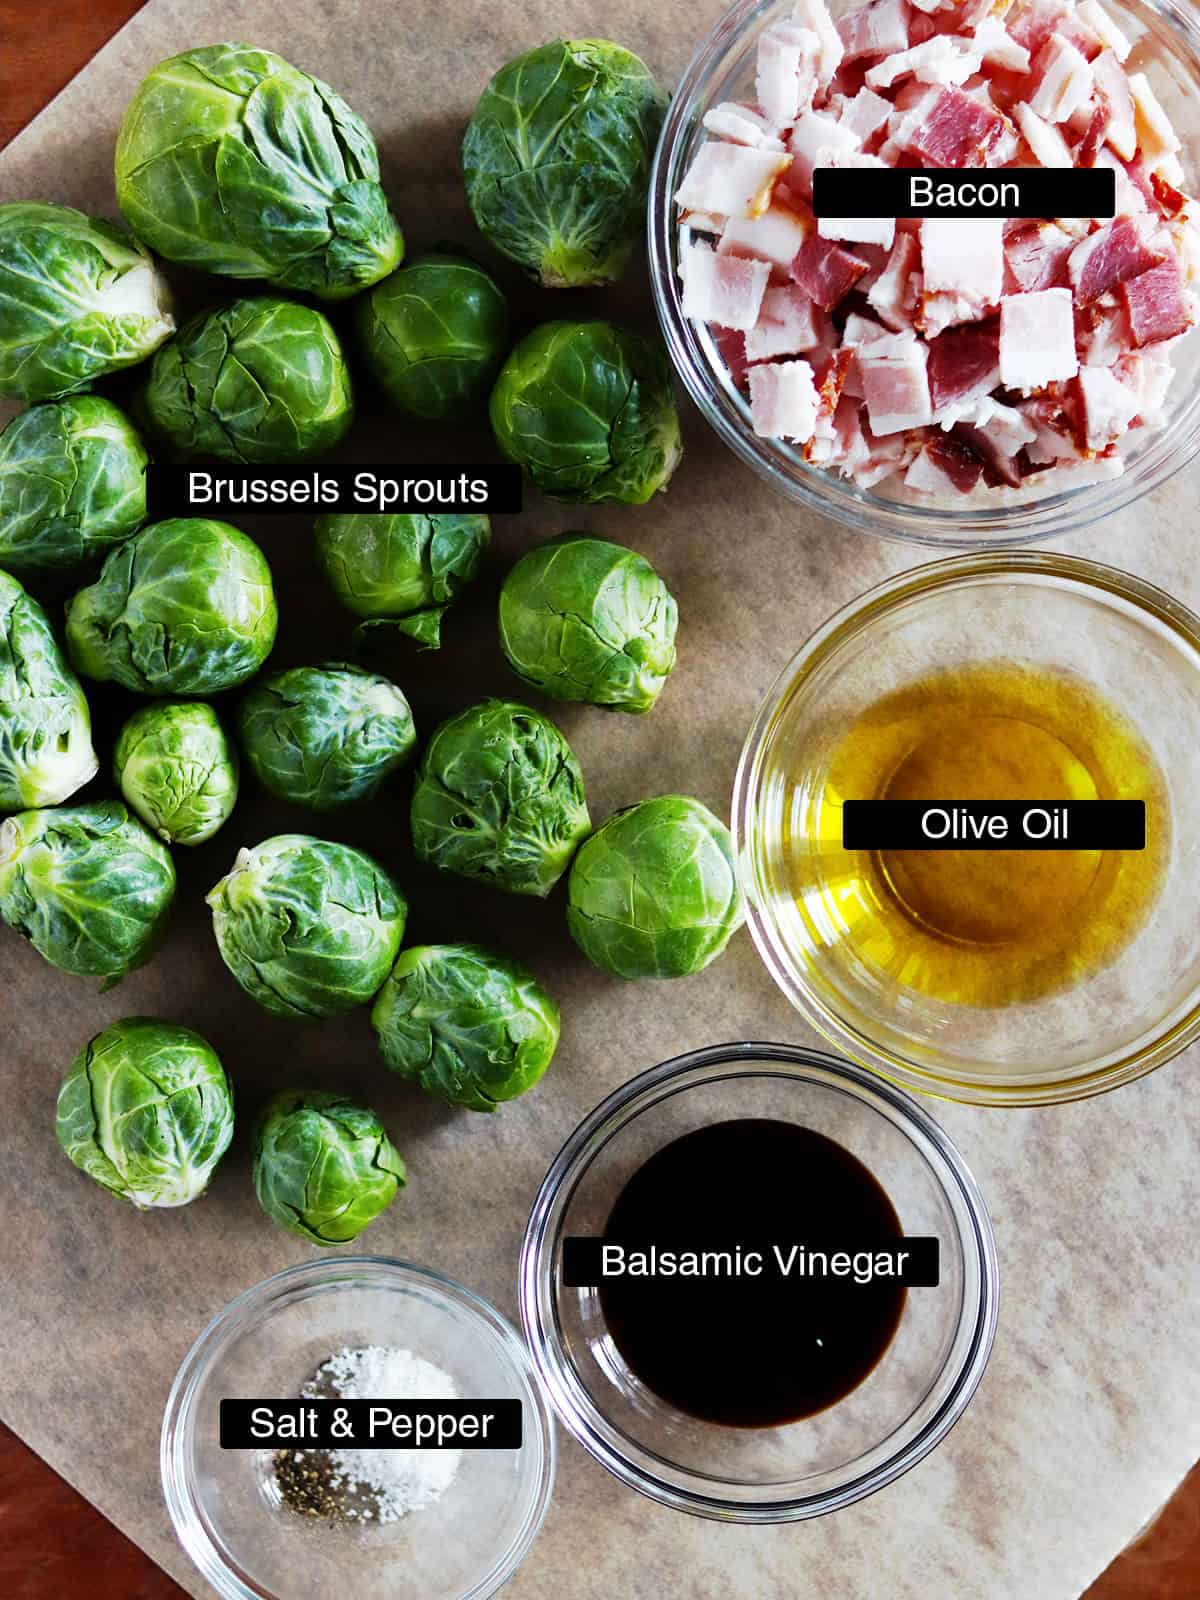 Ingredients for roasted Brussels sprouts and bacon on a parchment paper lined brown table.